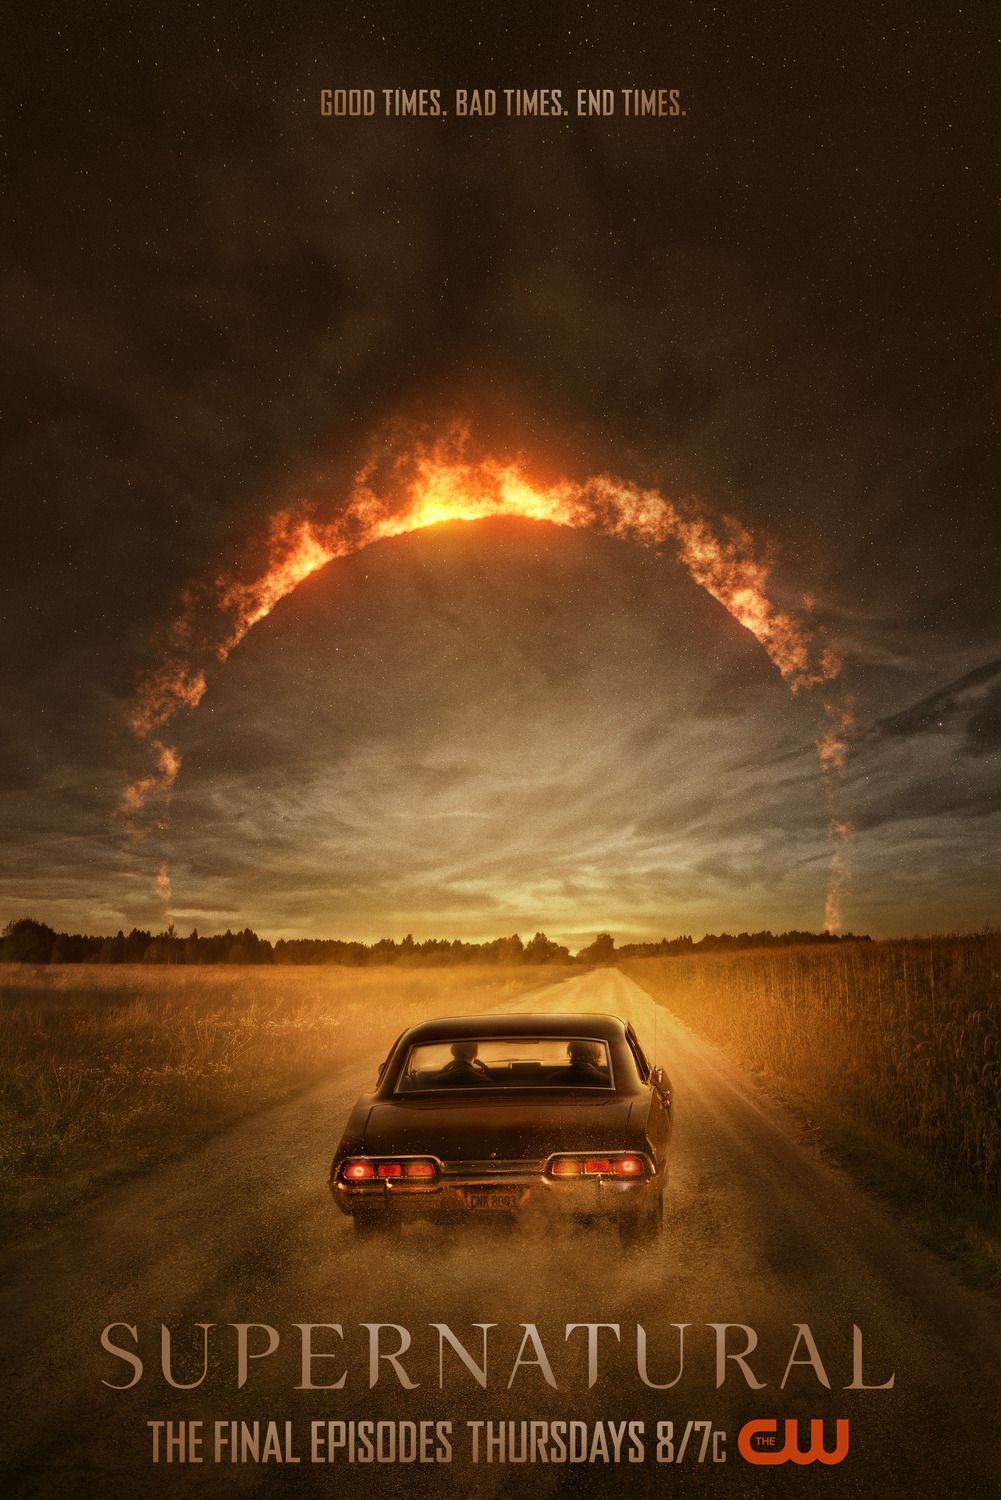 The Winchesters' Black Impala driving towards a hellish horizon in the Supernatural TV Show Poster